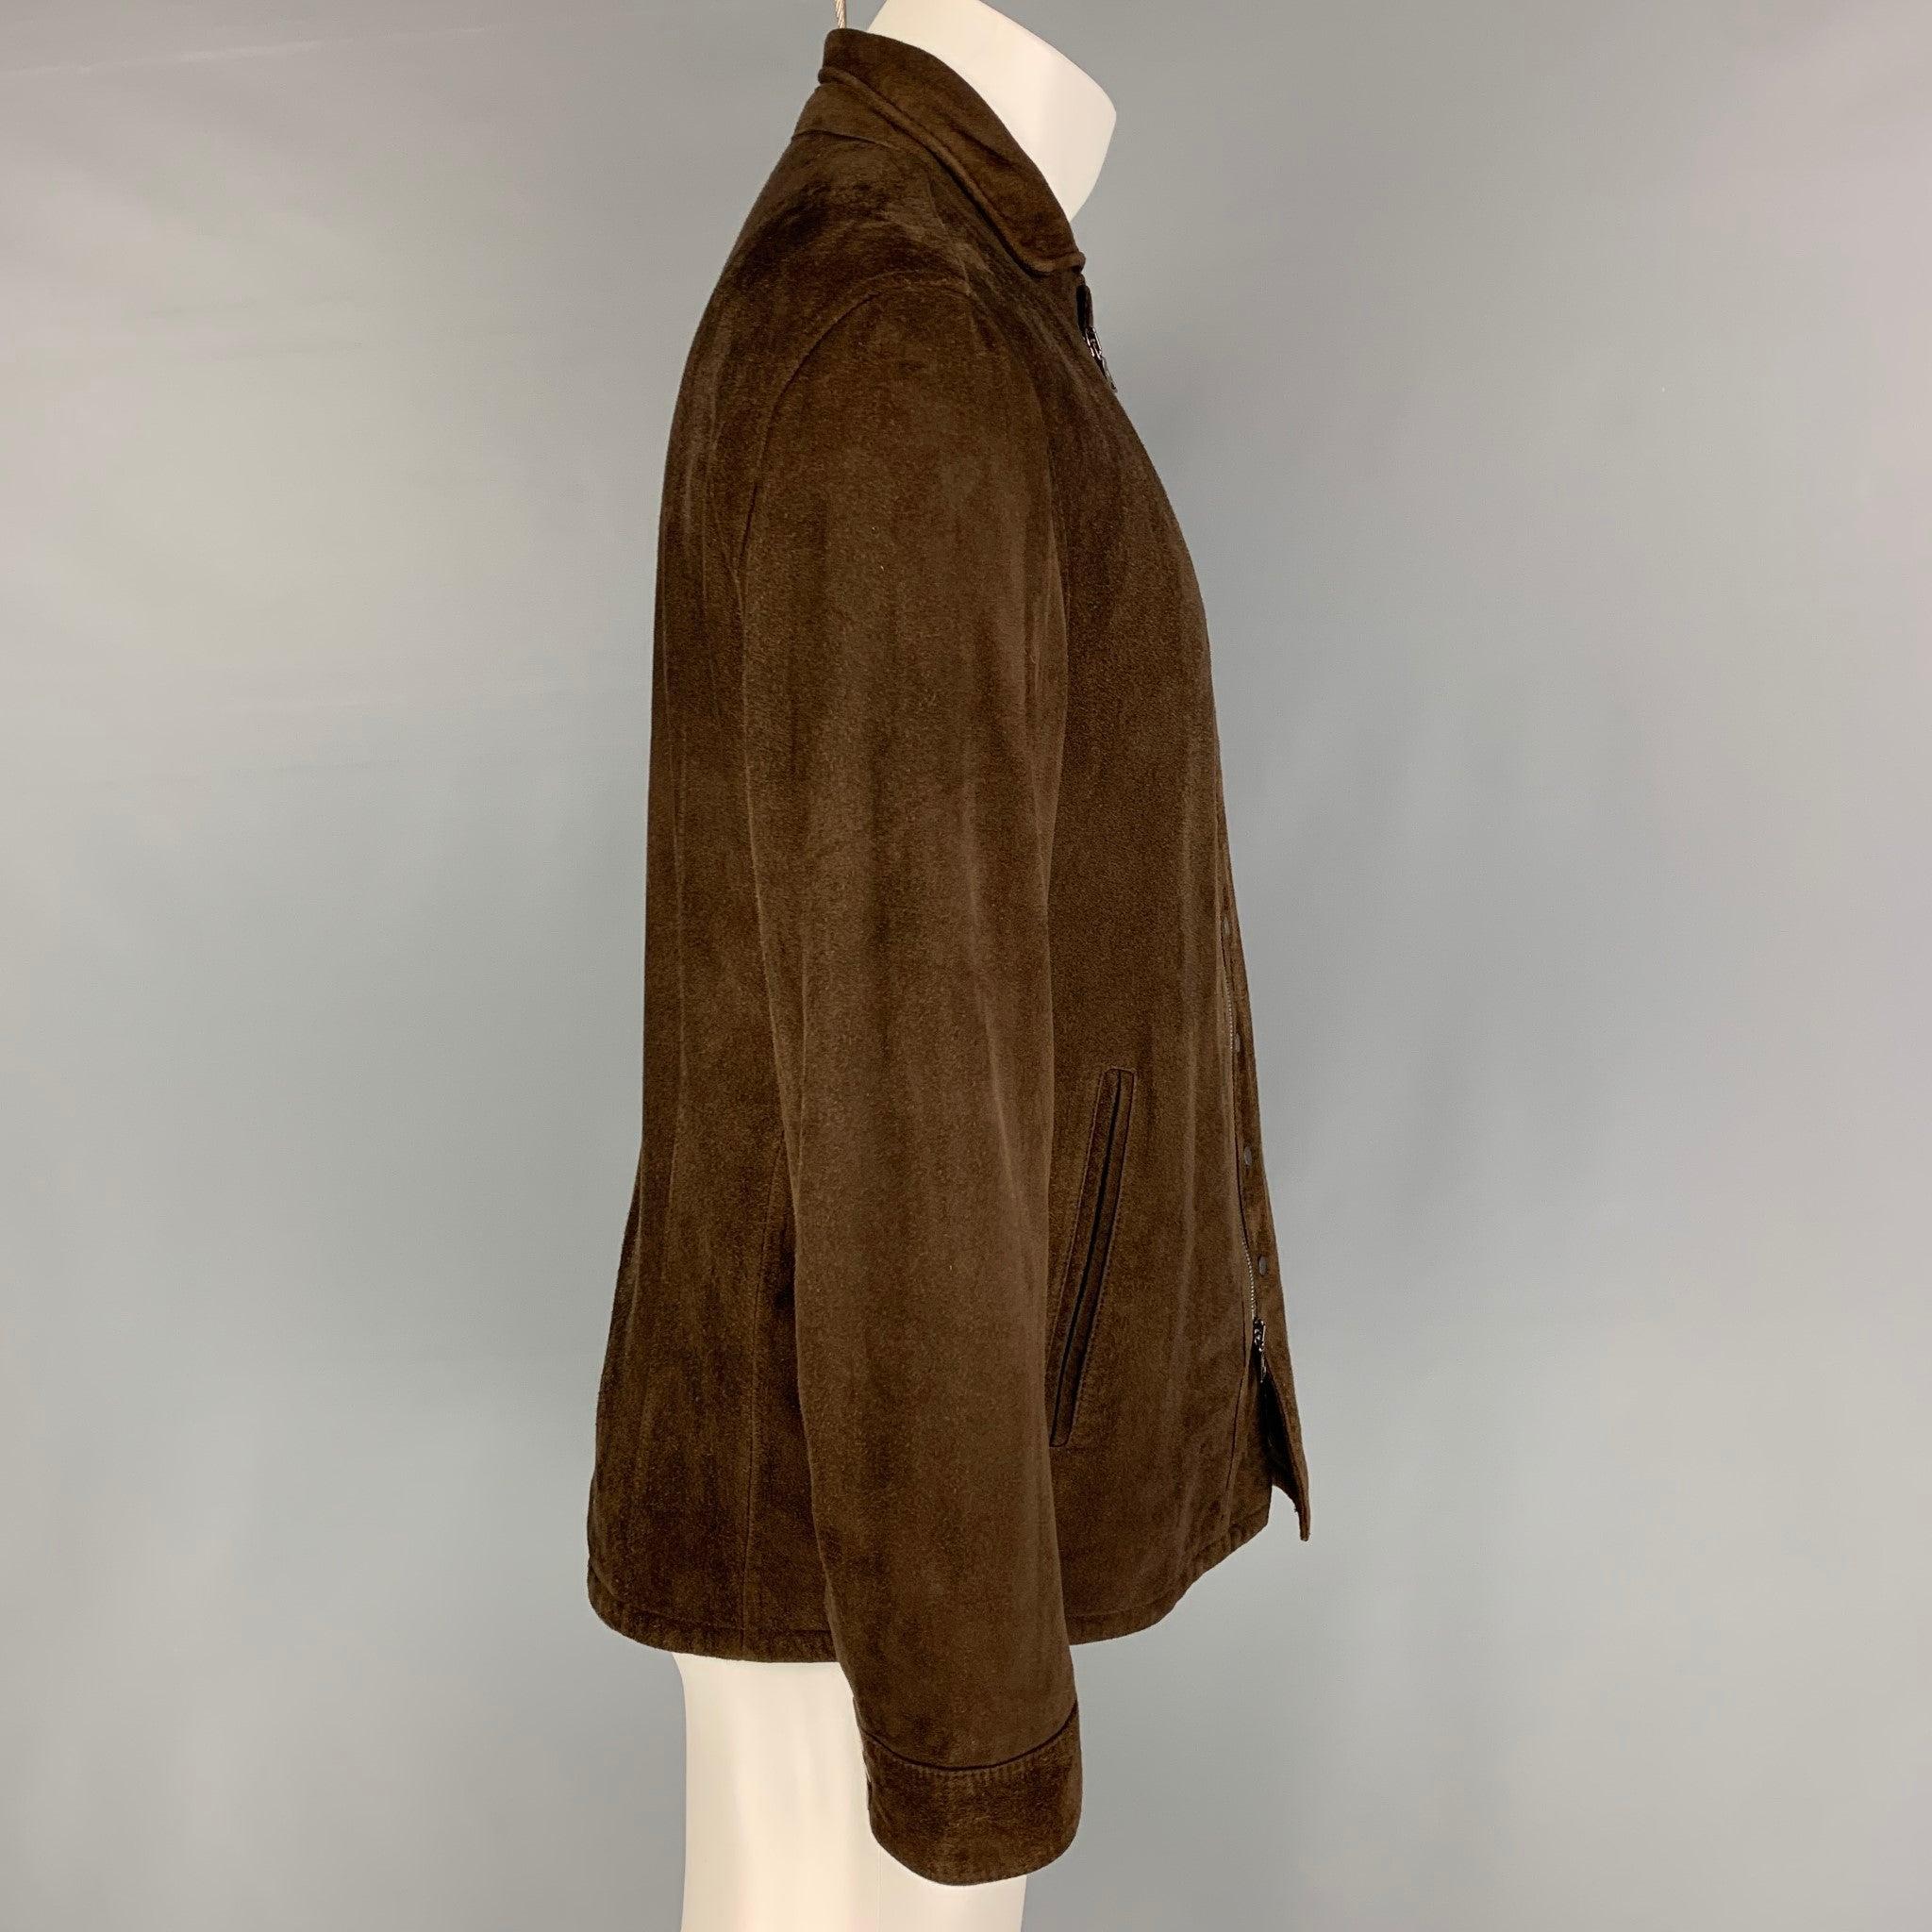 JOHN VARVATOS jacket comes in a brown suede featuring a small spread collar, front pockets, and a zip & snap button closure.
Very Good
Pre-Owned Condition. 

Marked:   50 

Measurements: 
 
Shoulder: 18 inches  Chest: 40 inches  Sleeve: 26 inches 